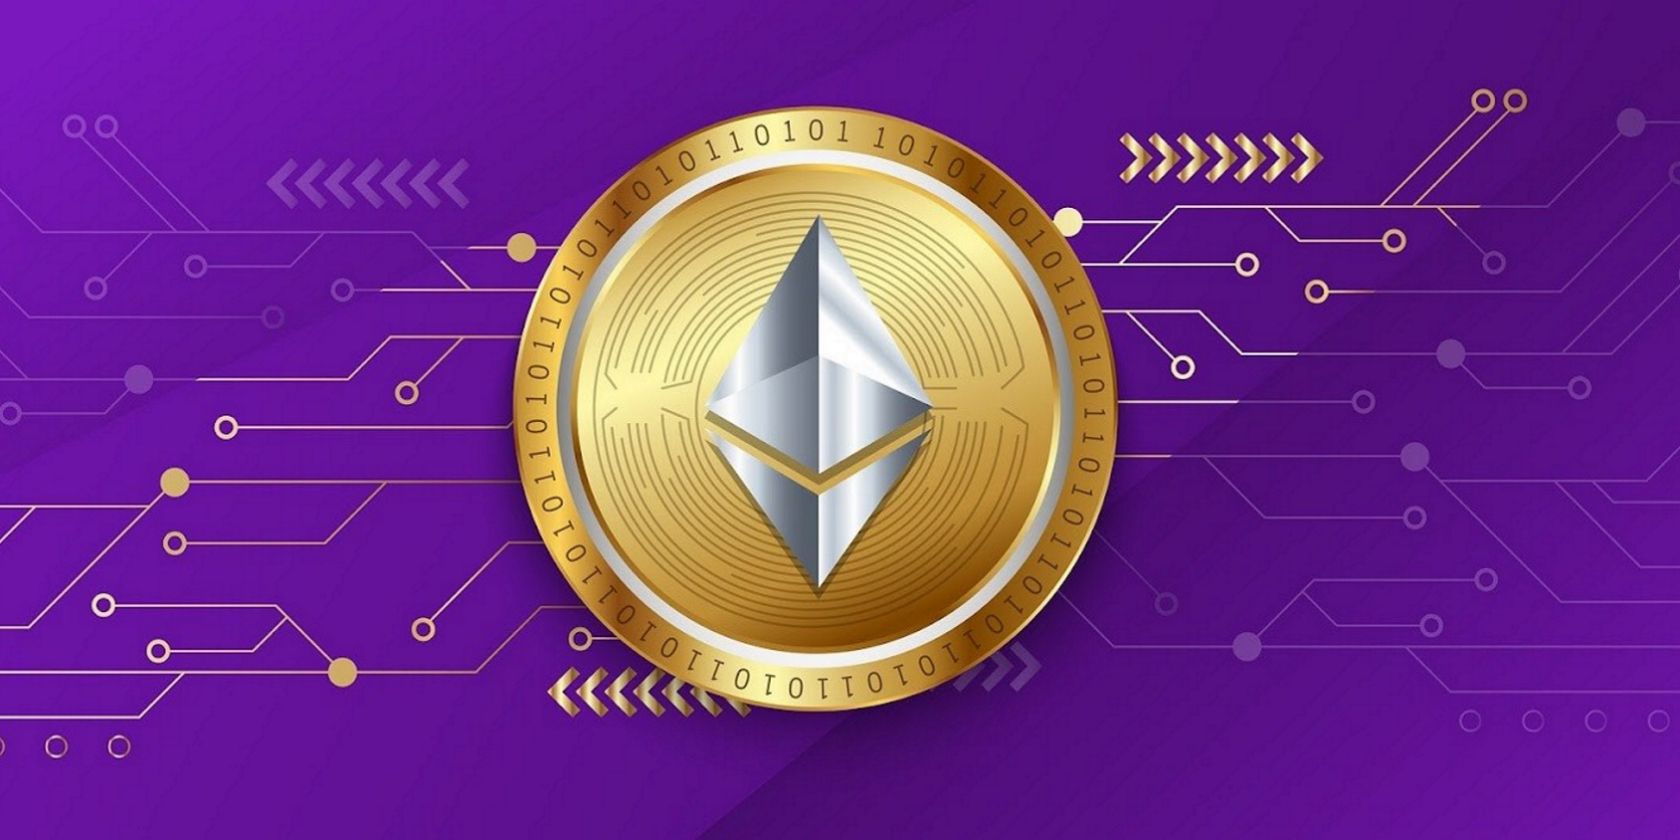 A gold Ethereum coin